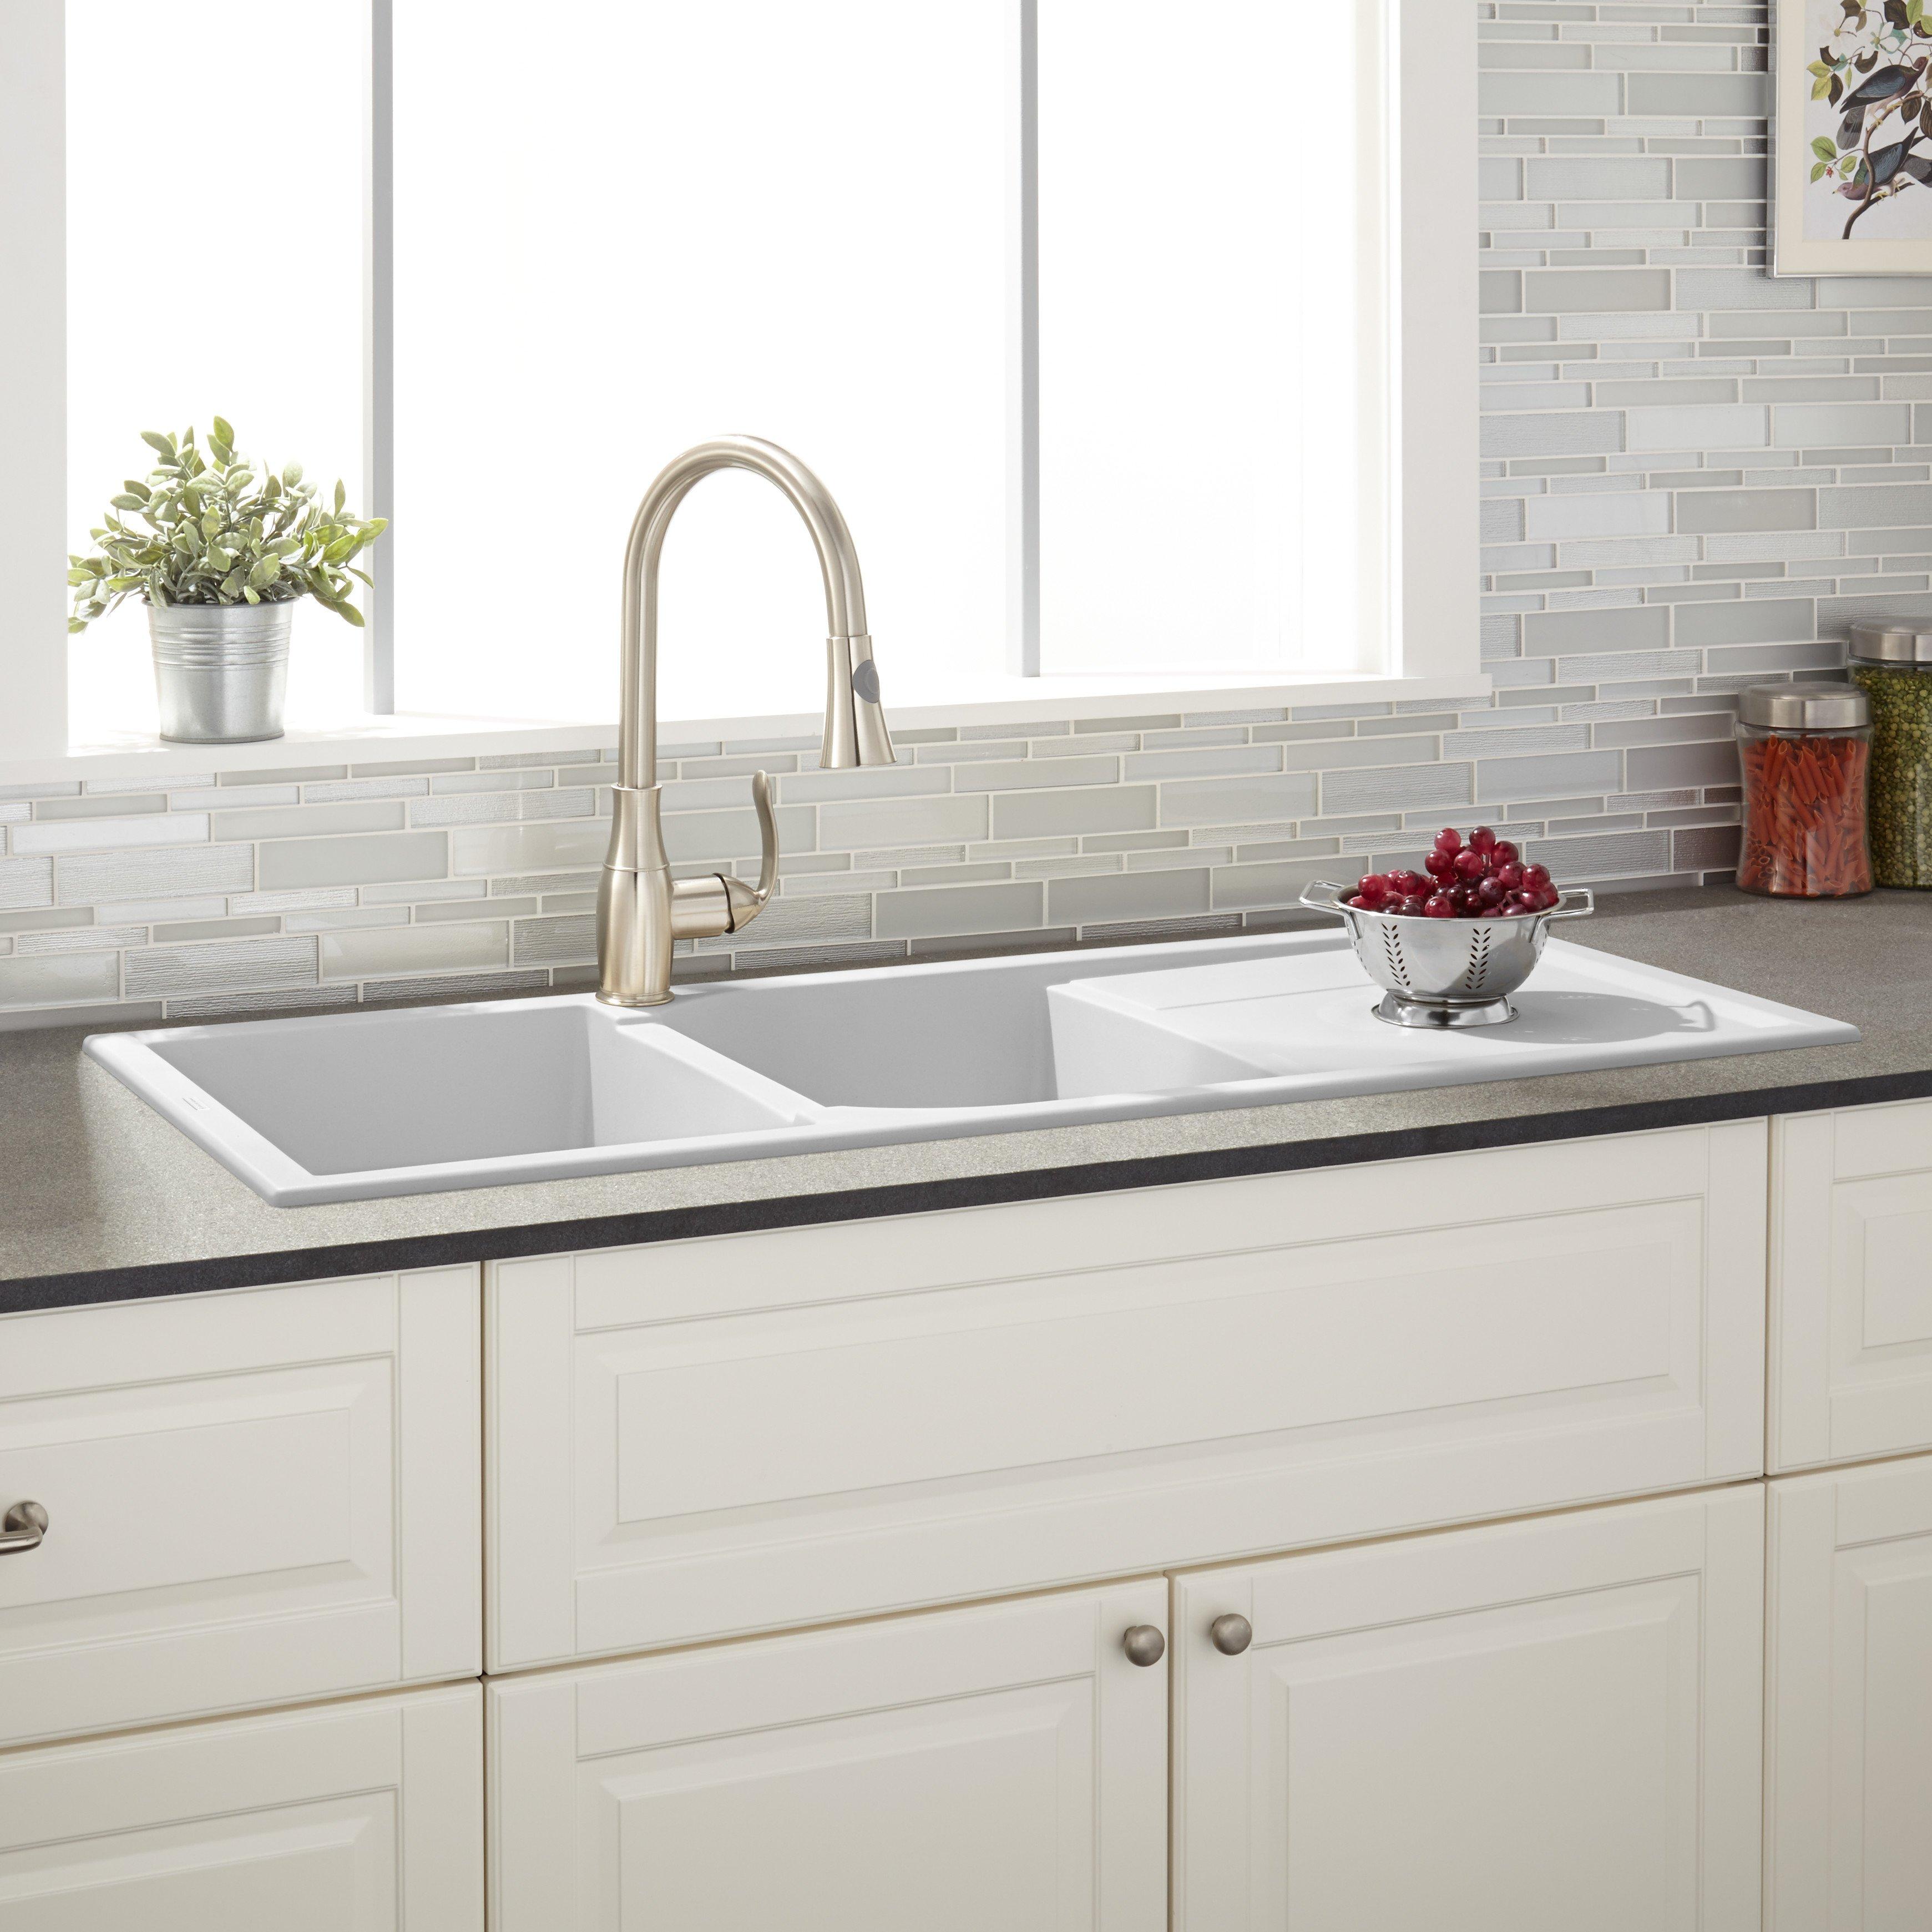 White Porcelain Kitchen Sink With Drainboard | Wow Blog